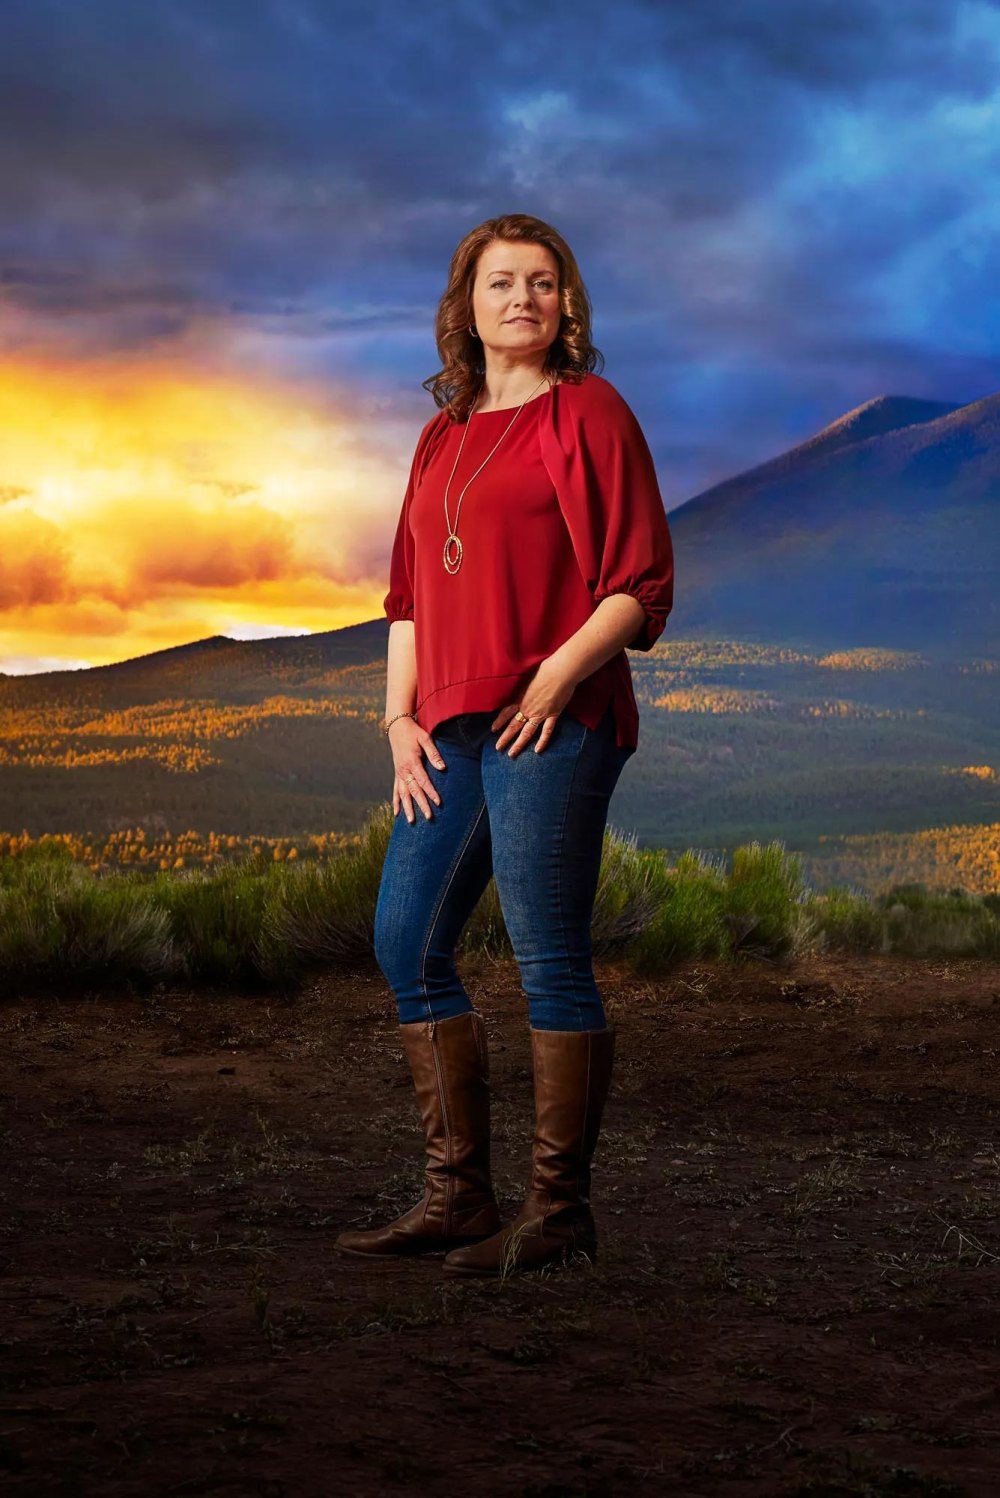 Sister Wives' Christine Brown Reveals How Often She and Kody Had Sex Before Split, More Revelations